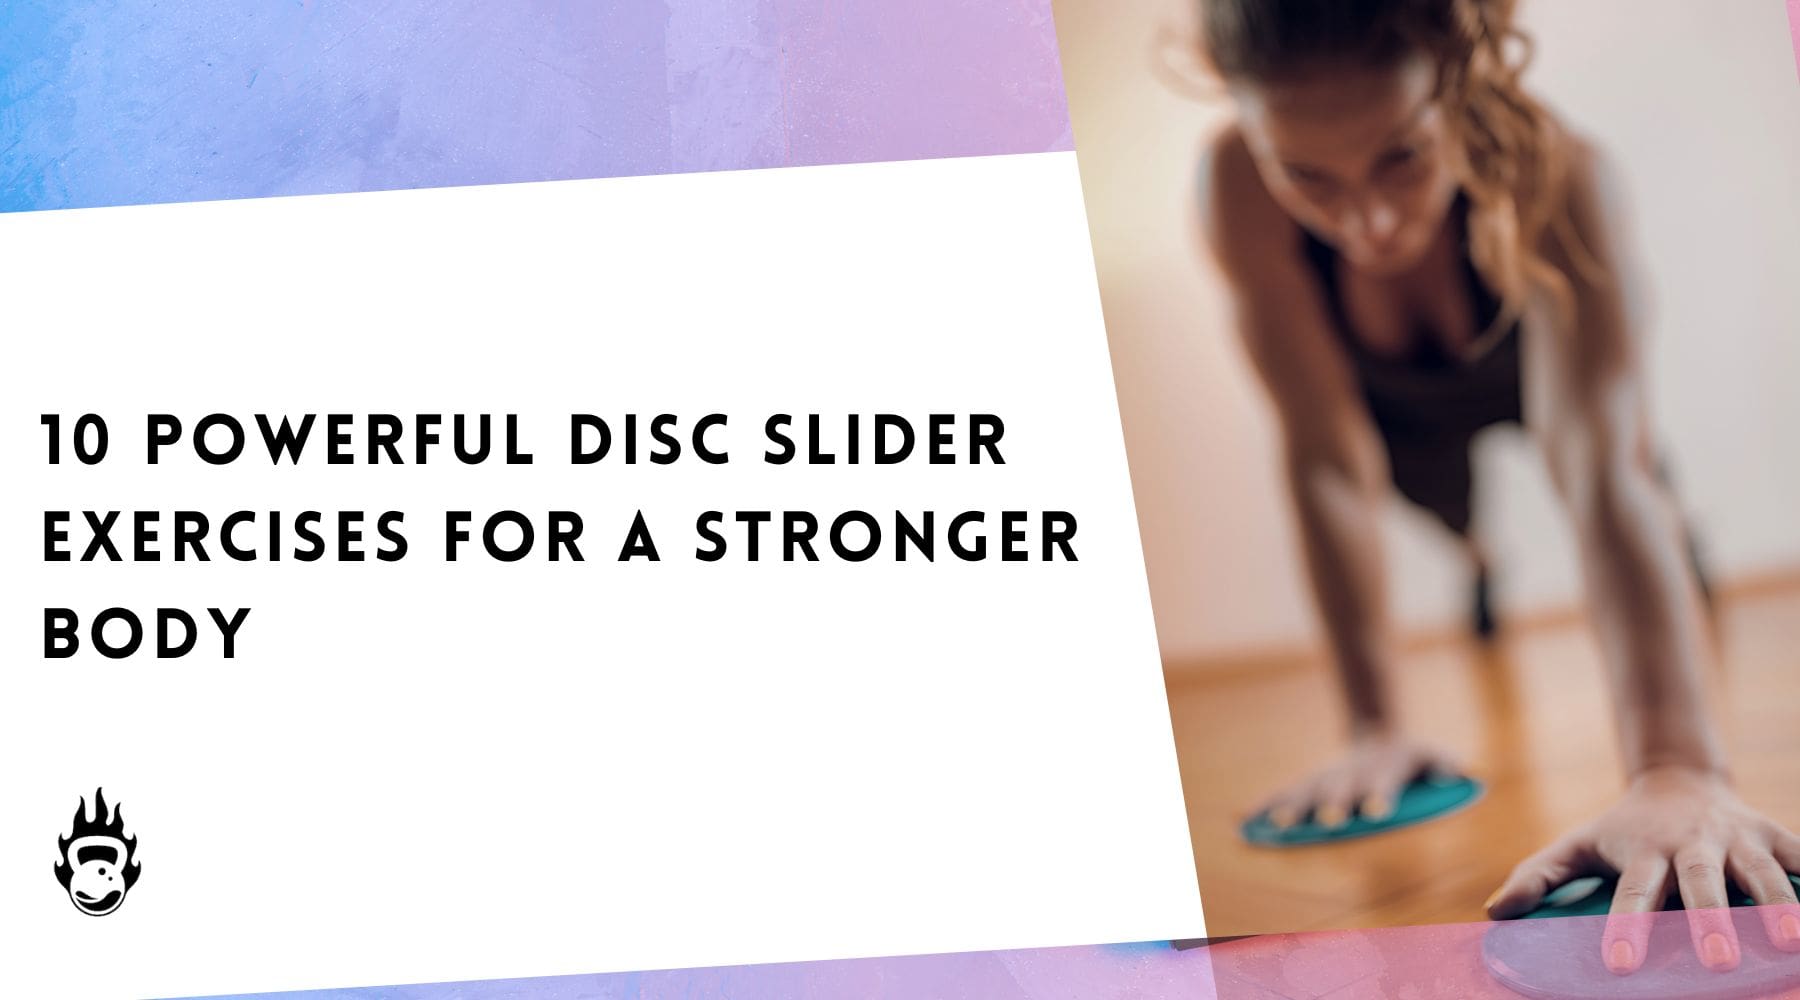 15-Minute Core Workout with Sliders - The best slider exercises